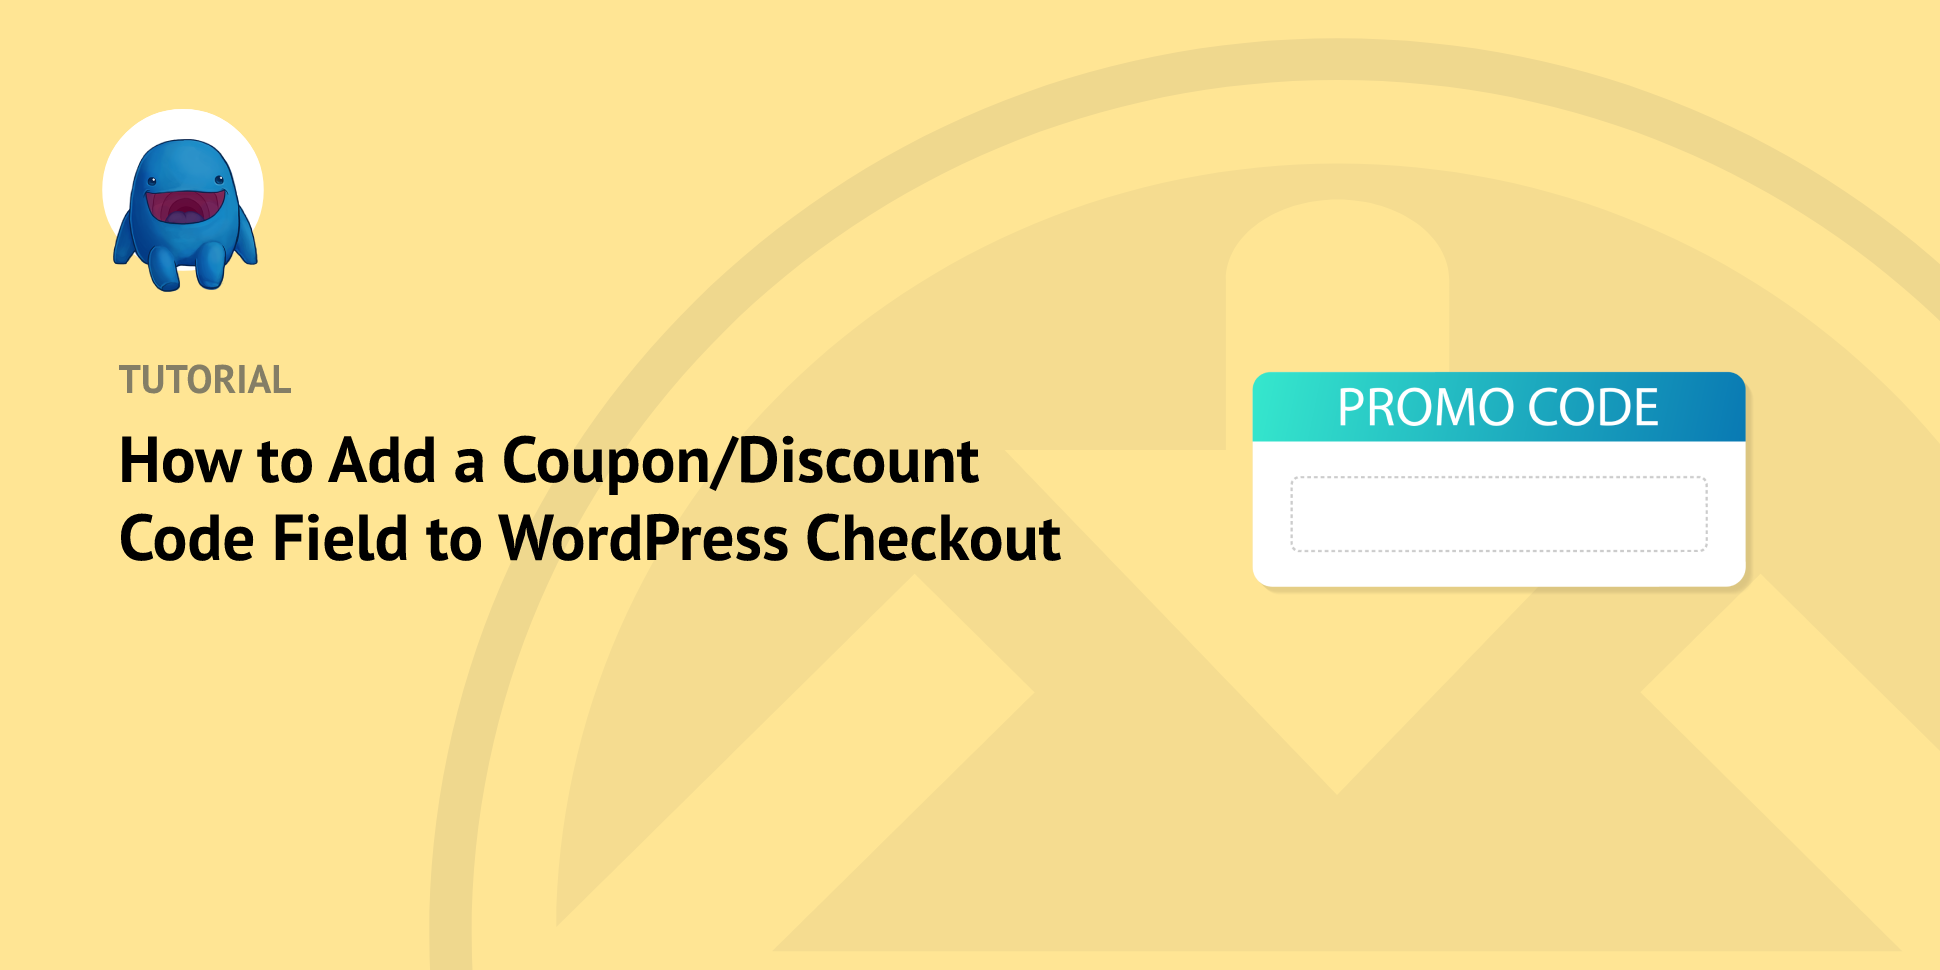 How to Add a Discount Code Field to WordPress Checkout Page